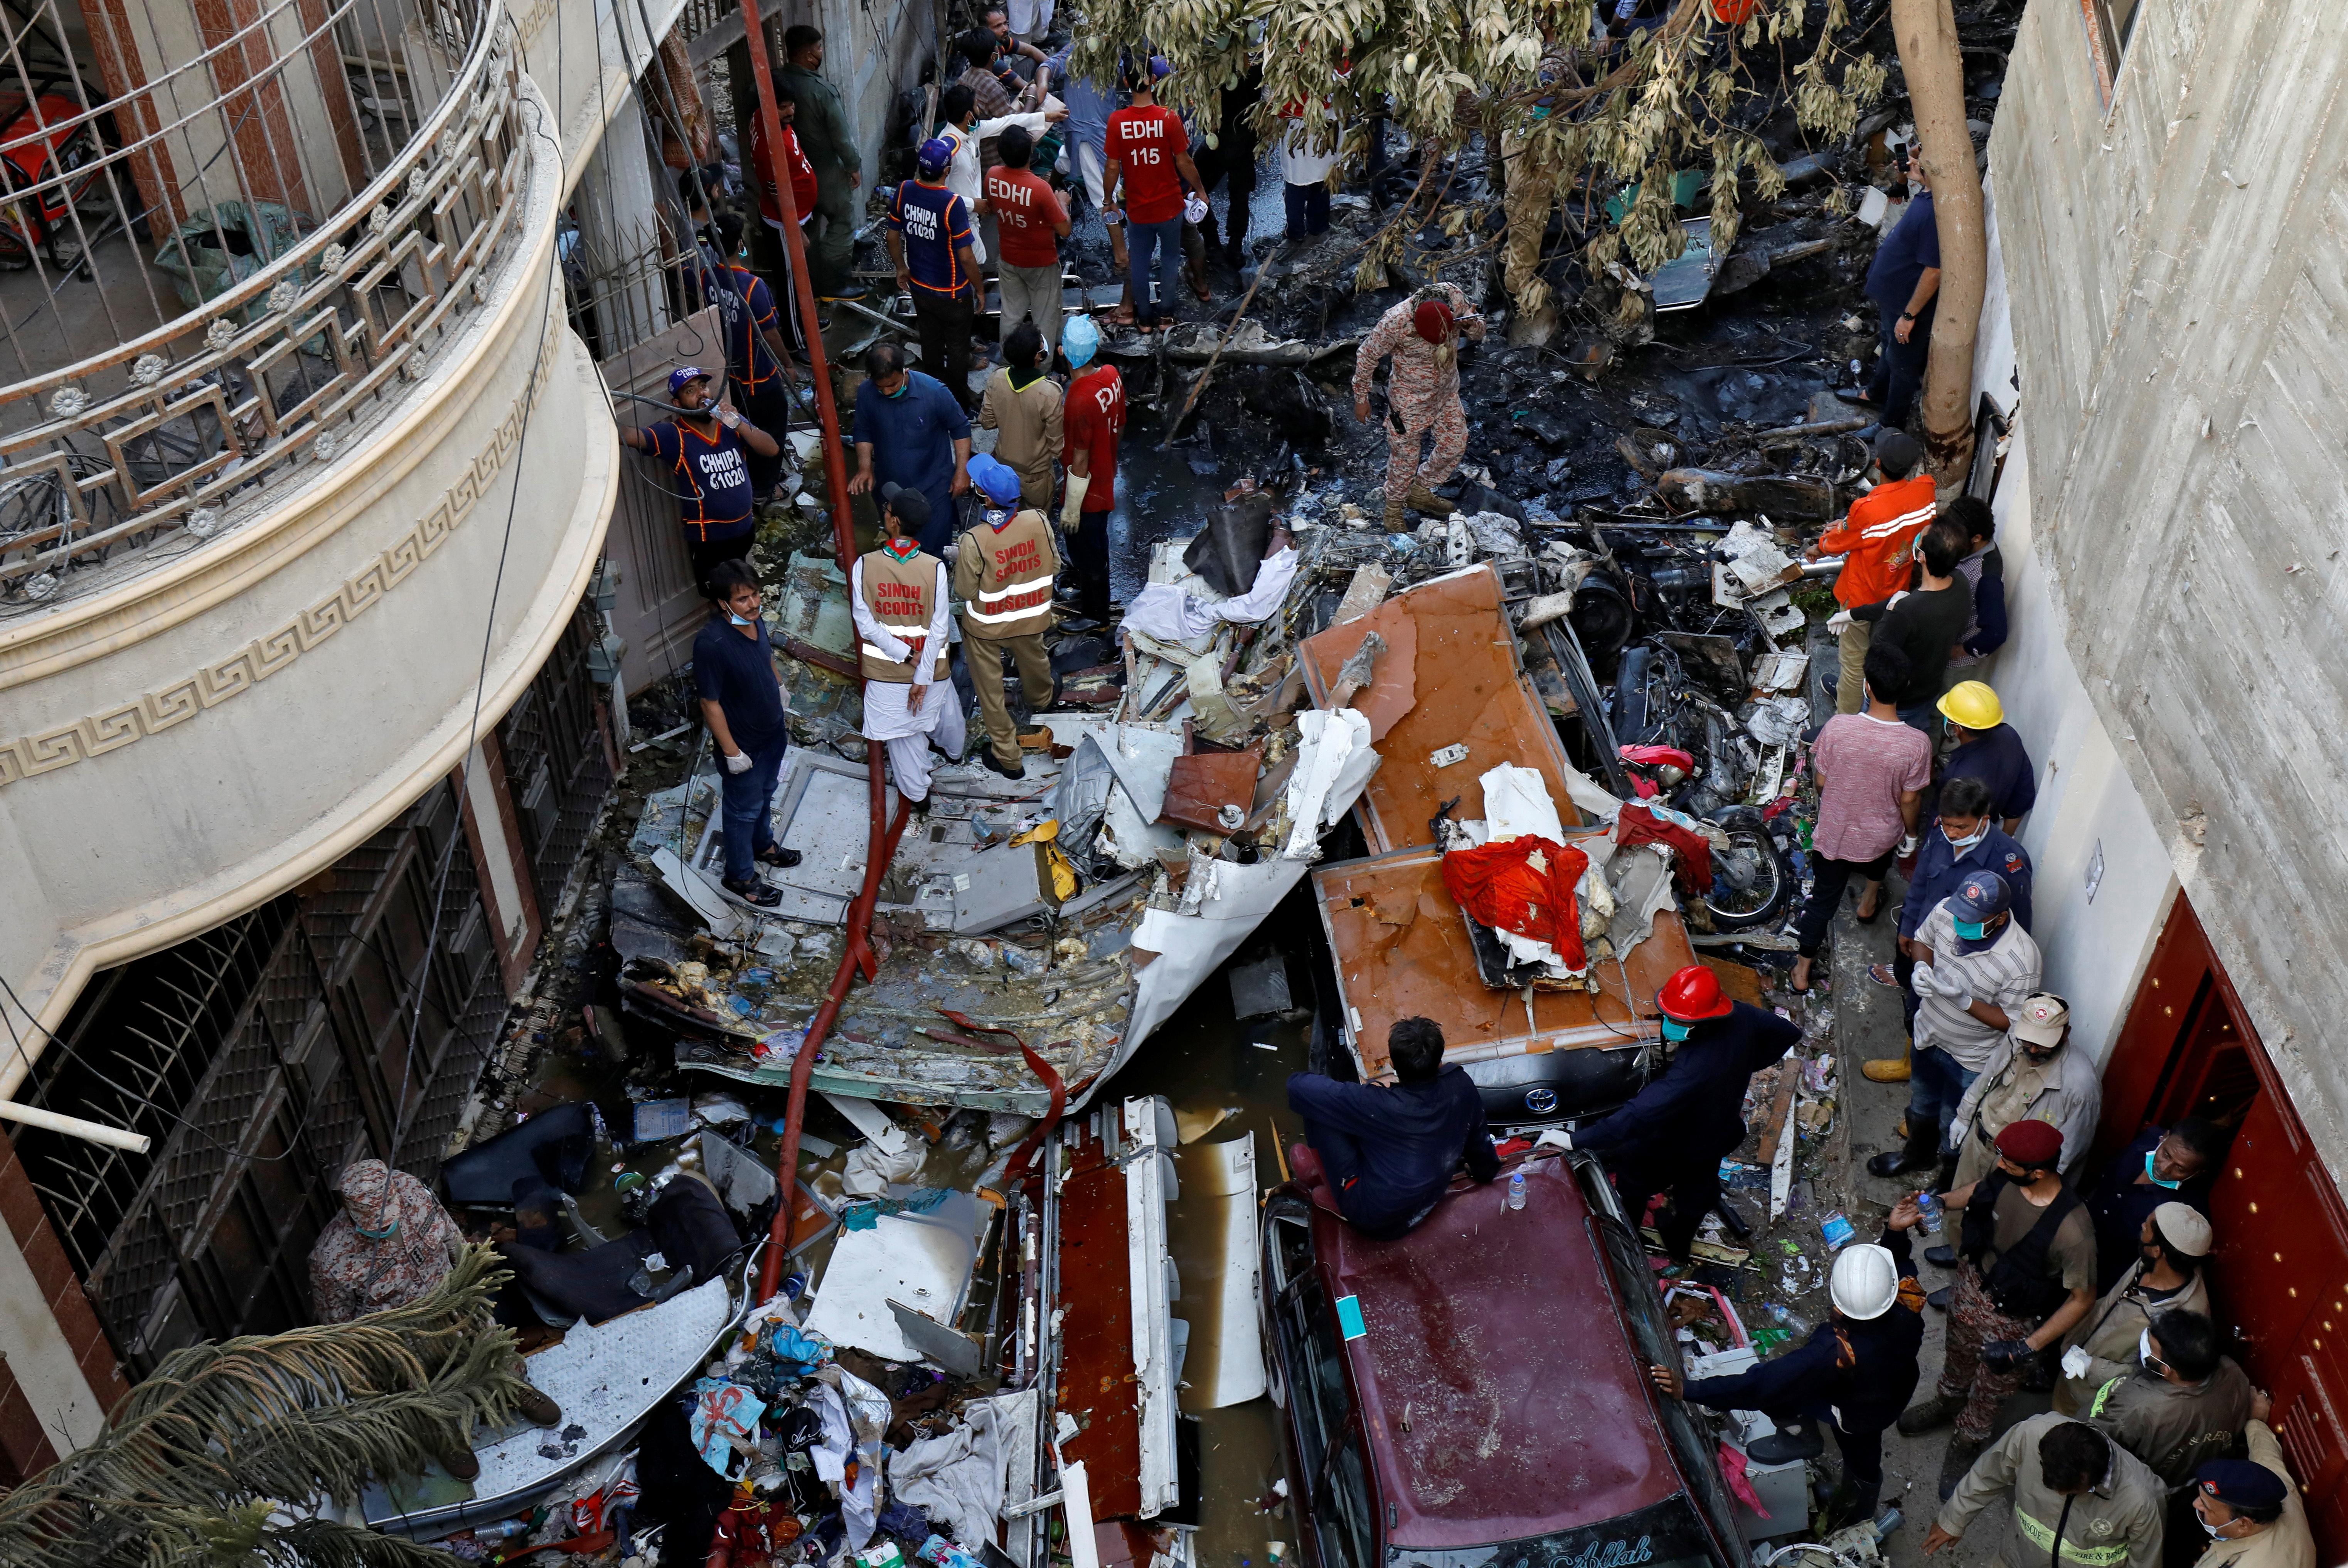 Rescue workers gather at the site of a passenger plane crash in a residential area near an airport in Karachi, Pakistan May 22, 2020. REUTERS/Akhtar Soomro - RC2PTG9FEVAS